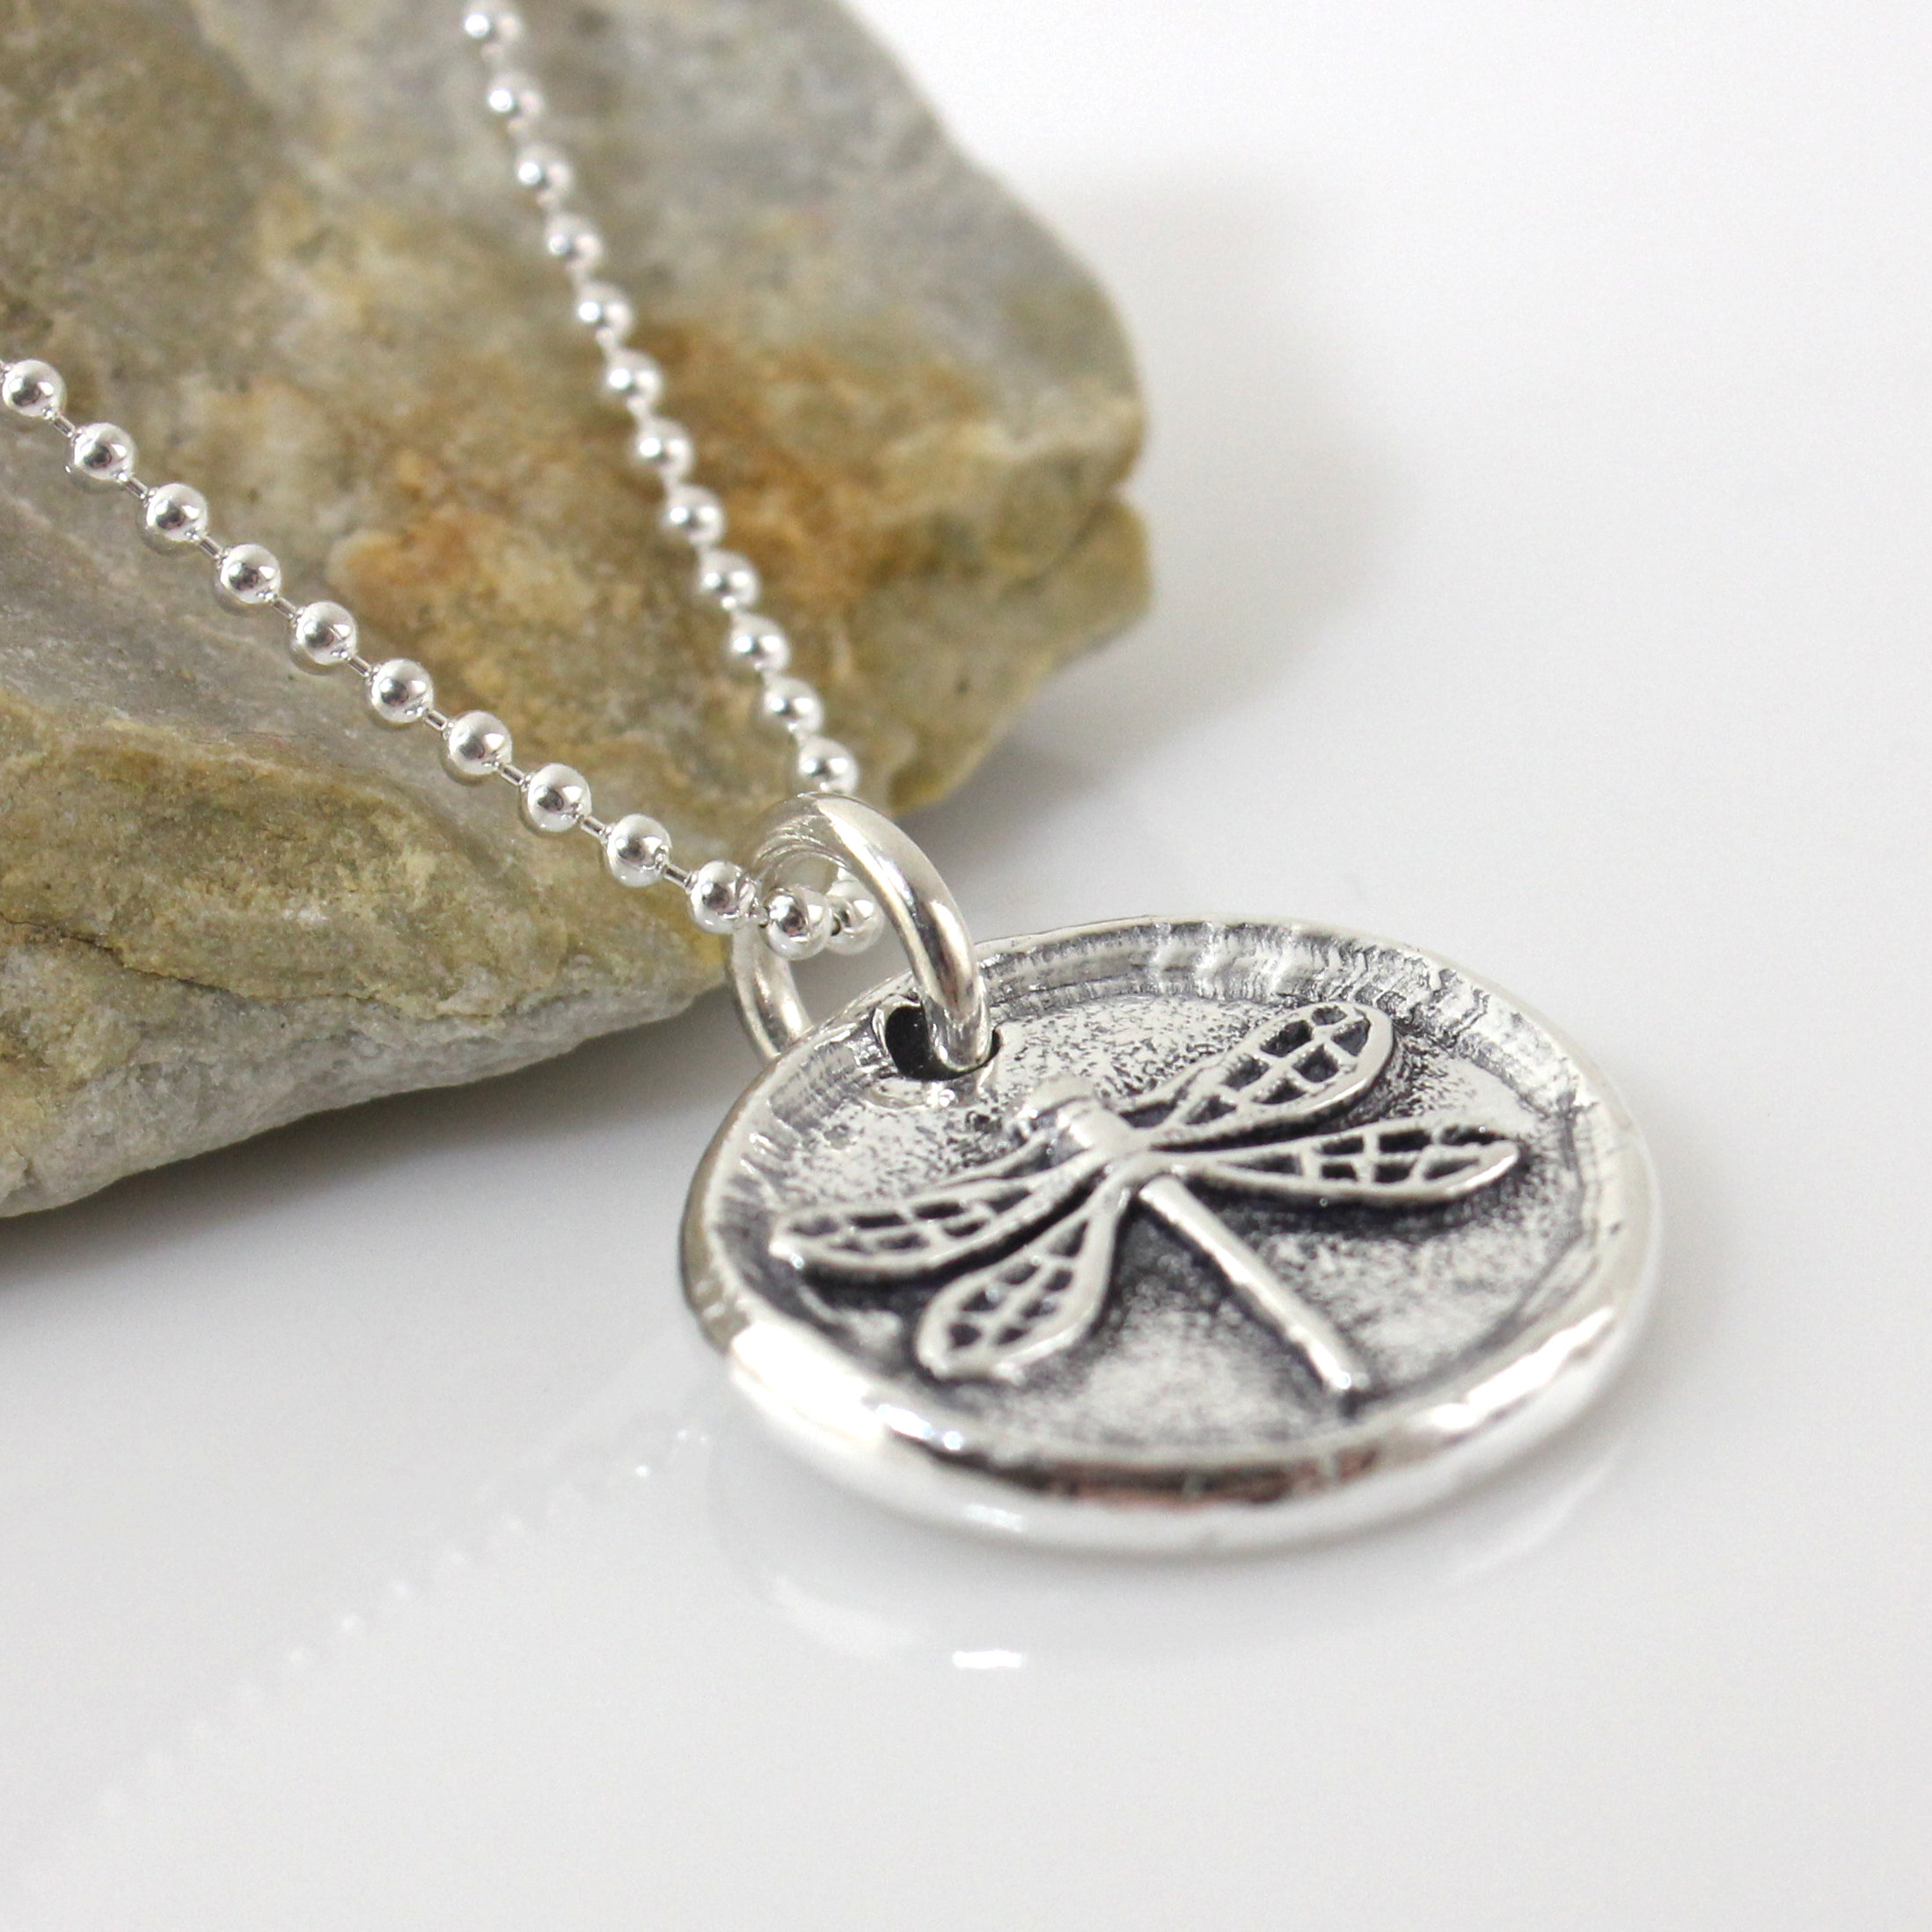 Dragonfly Wax Seal Inspired Necklace